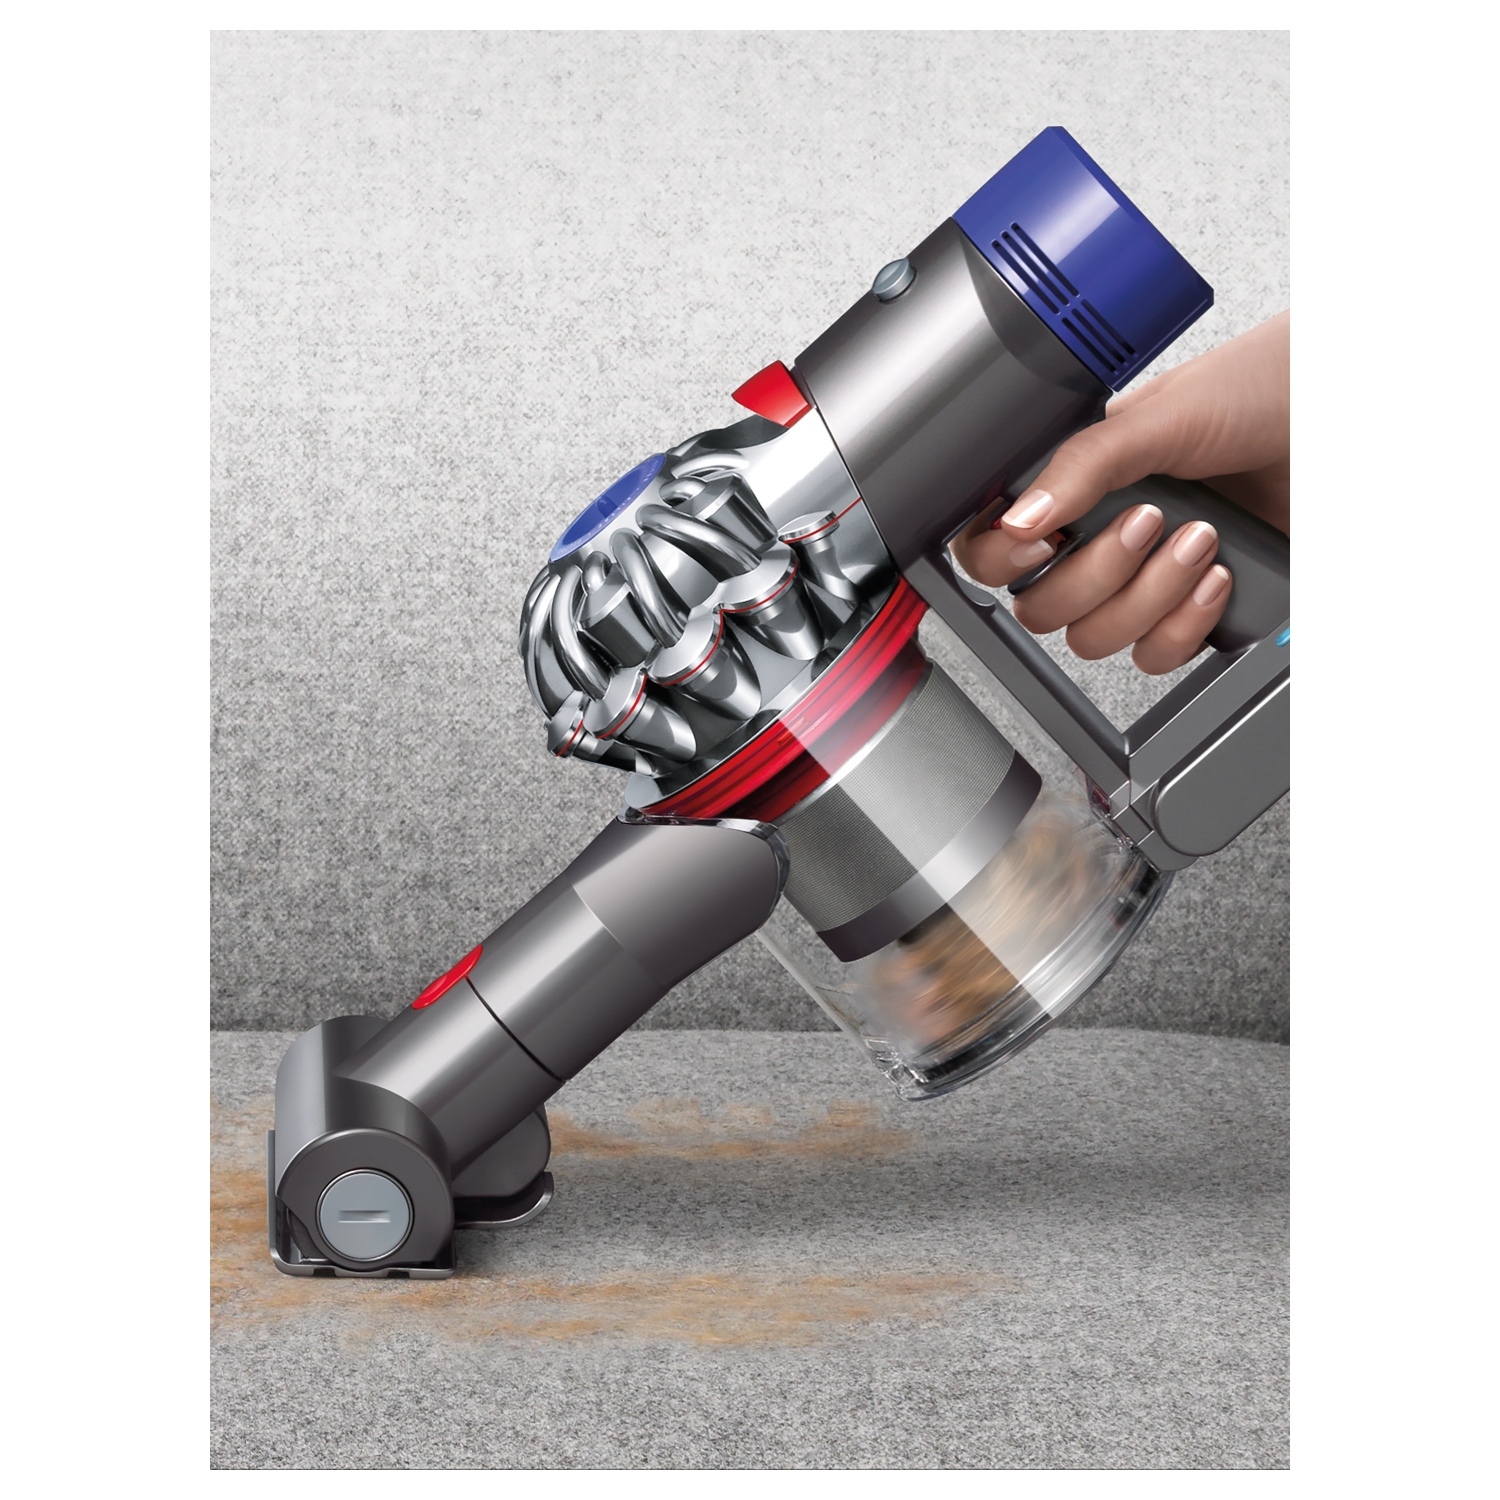 Dyson V7ANIMAL Cordless Vacuum Cleaner - 30 Minute Run Time with Complete Cleaning Kit - 3